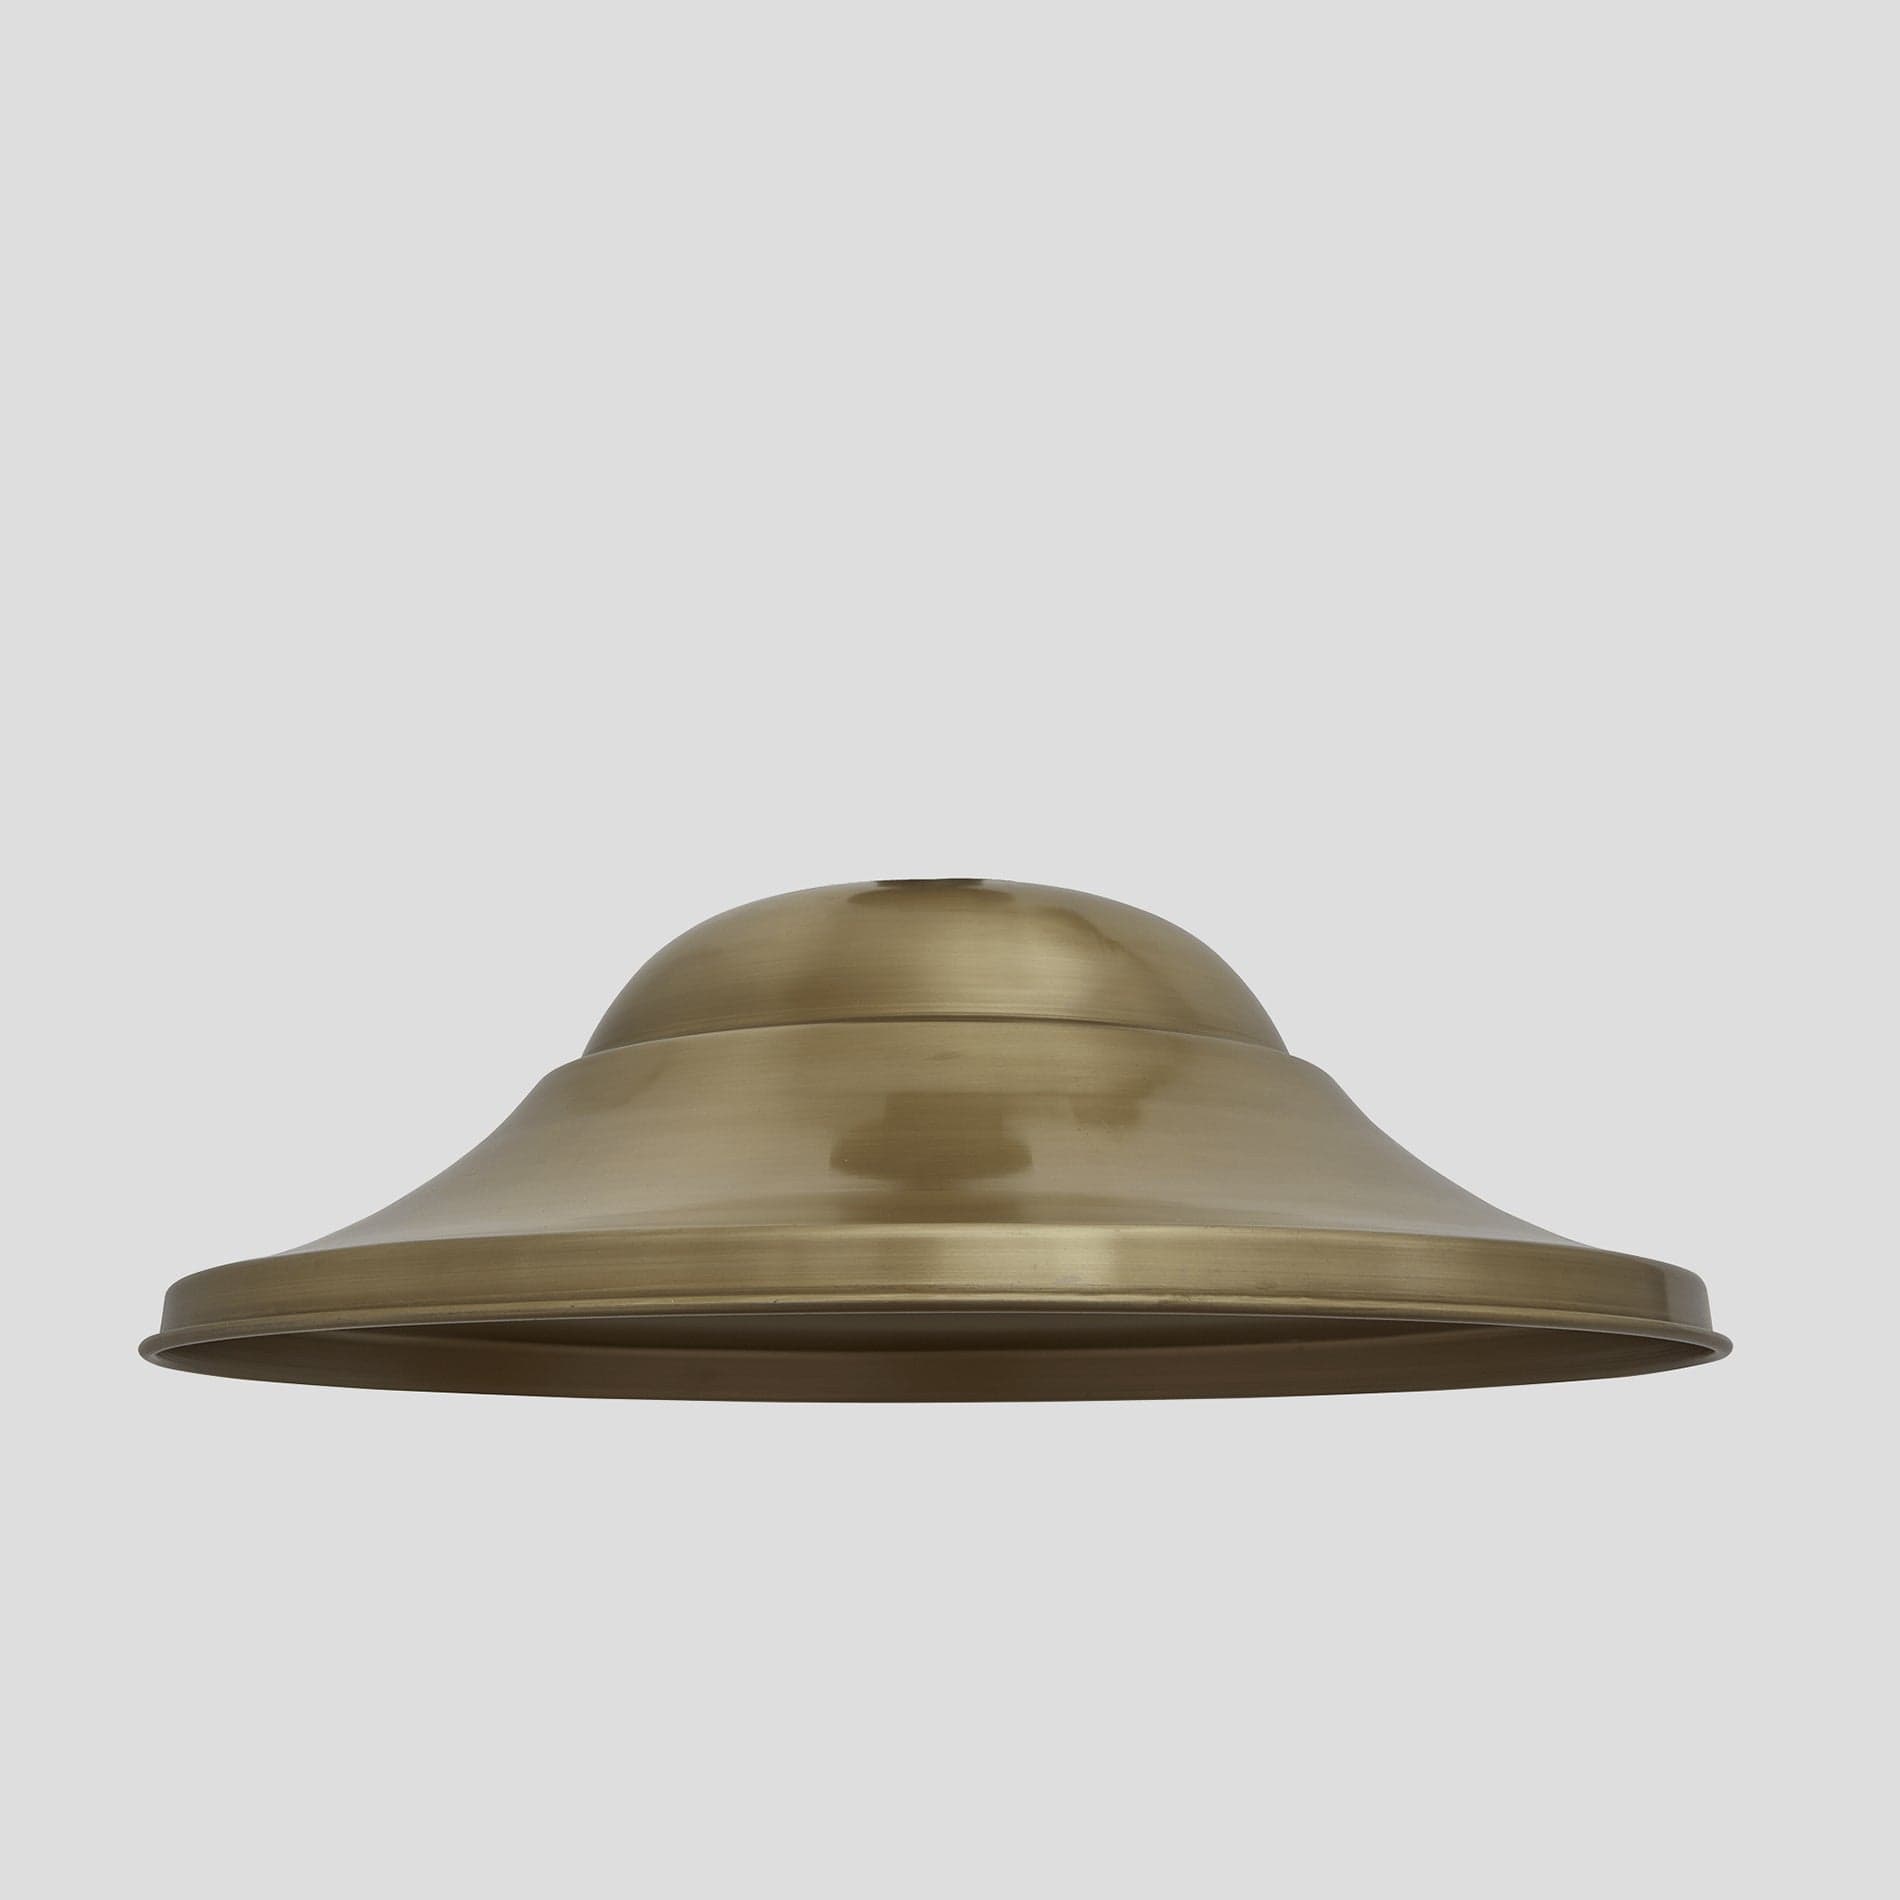 Giant Hat - 21 Inch - Brass - Shade Only Industville GH21-B-SO